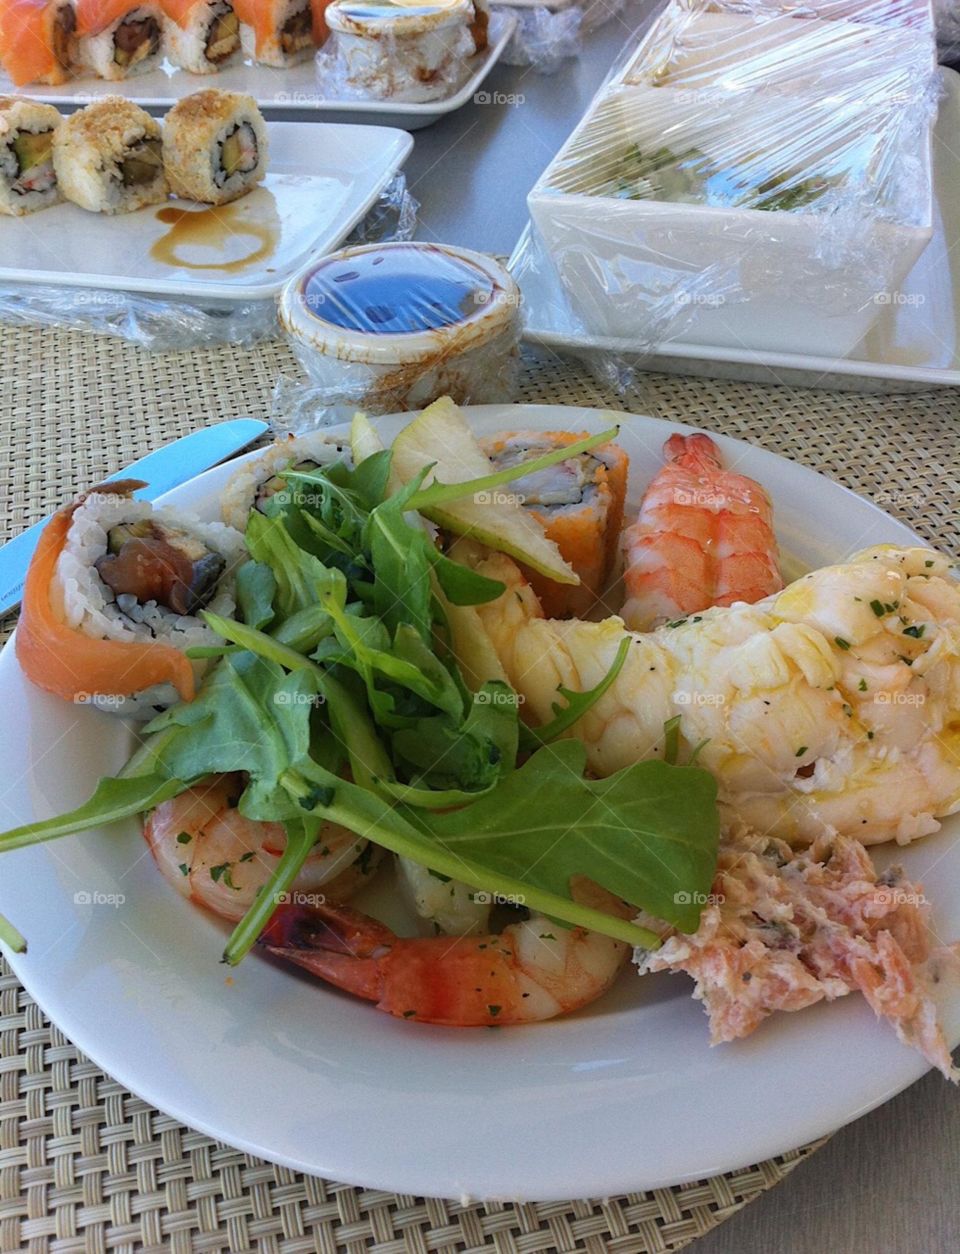 Can’t think of any Food better than seafood. Norwegian cruiseline fed us in our cabana on their private island. Great Stirrup Cay.